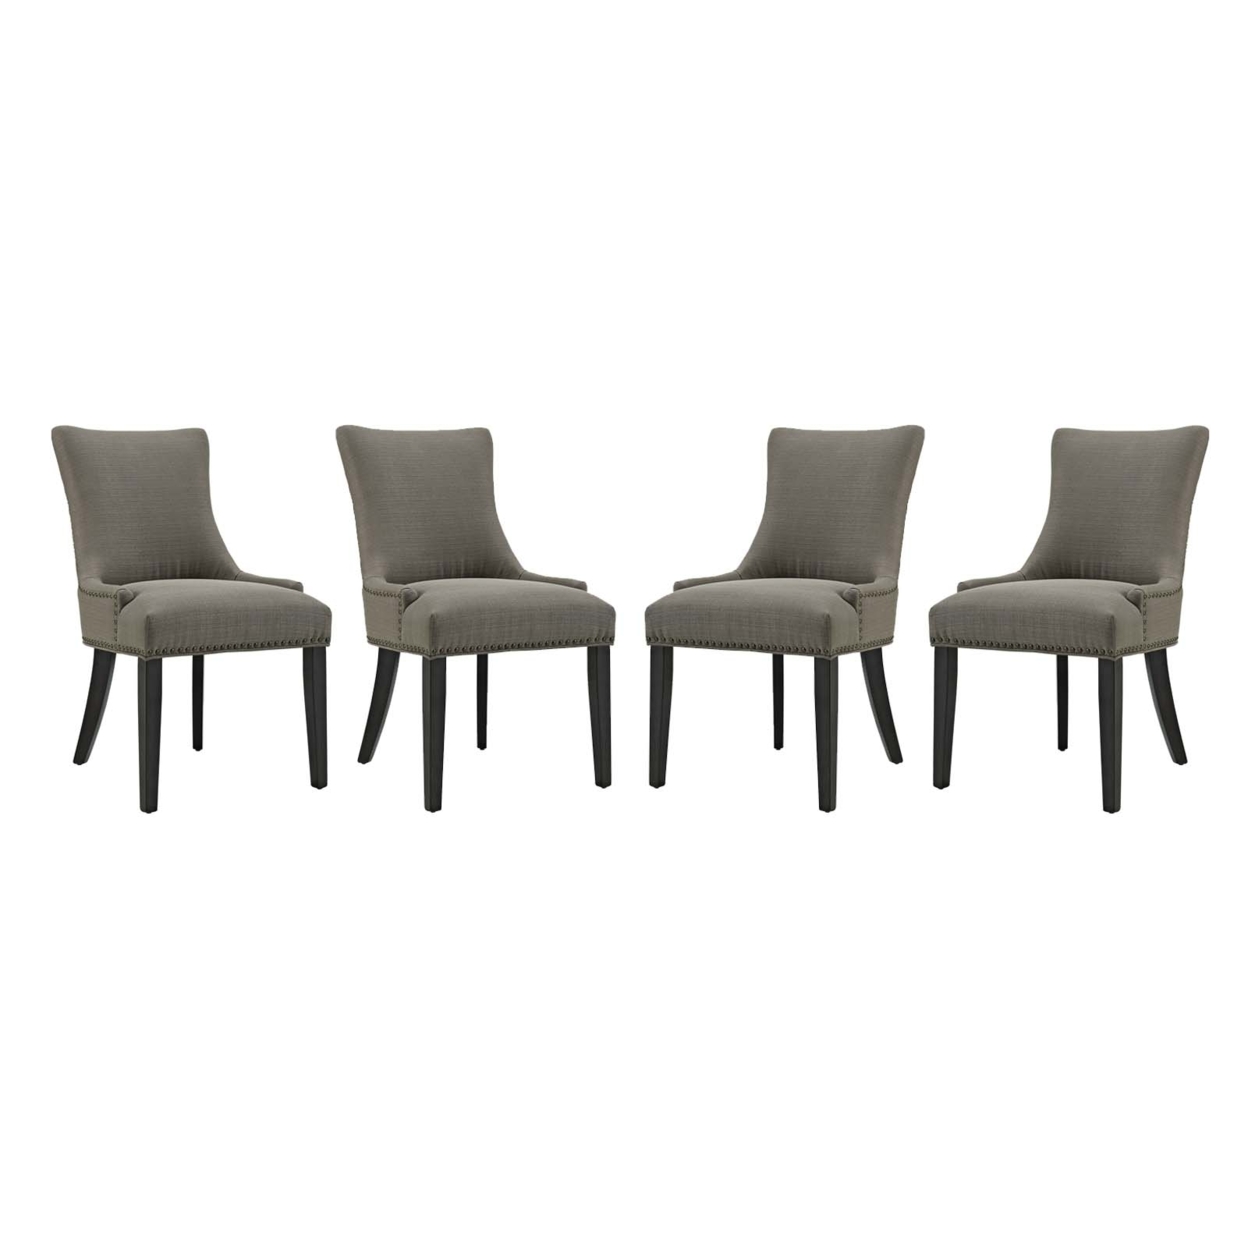 Marquis Dining Chair Fabric Set Of 4, Granite